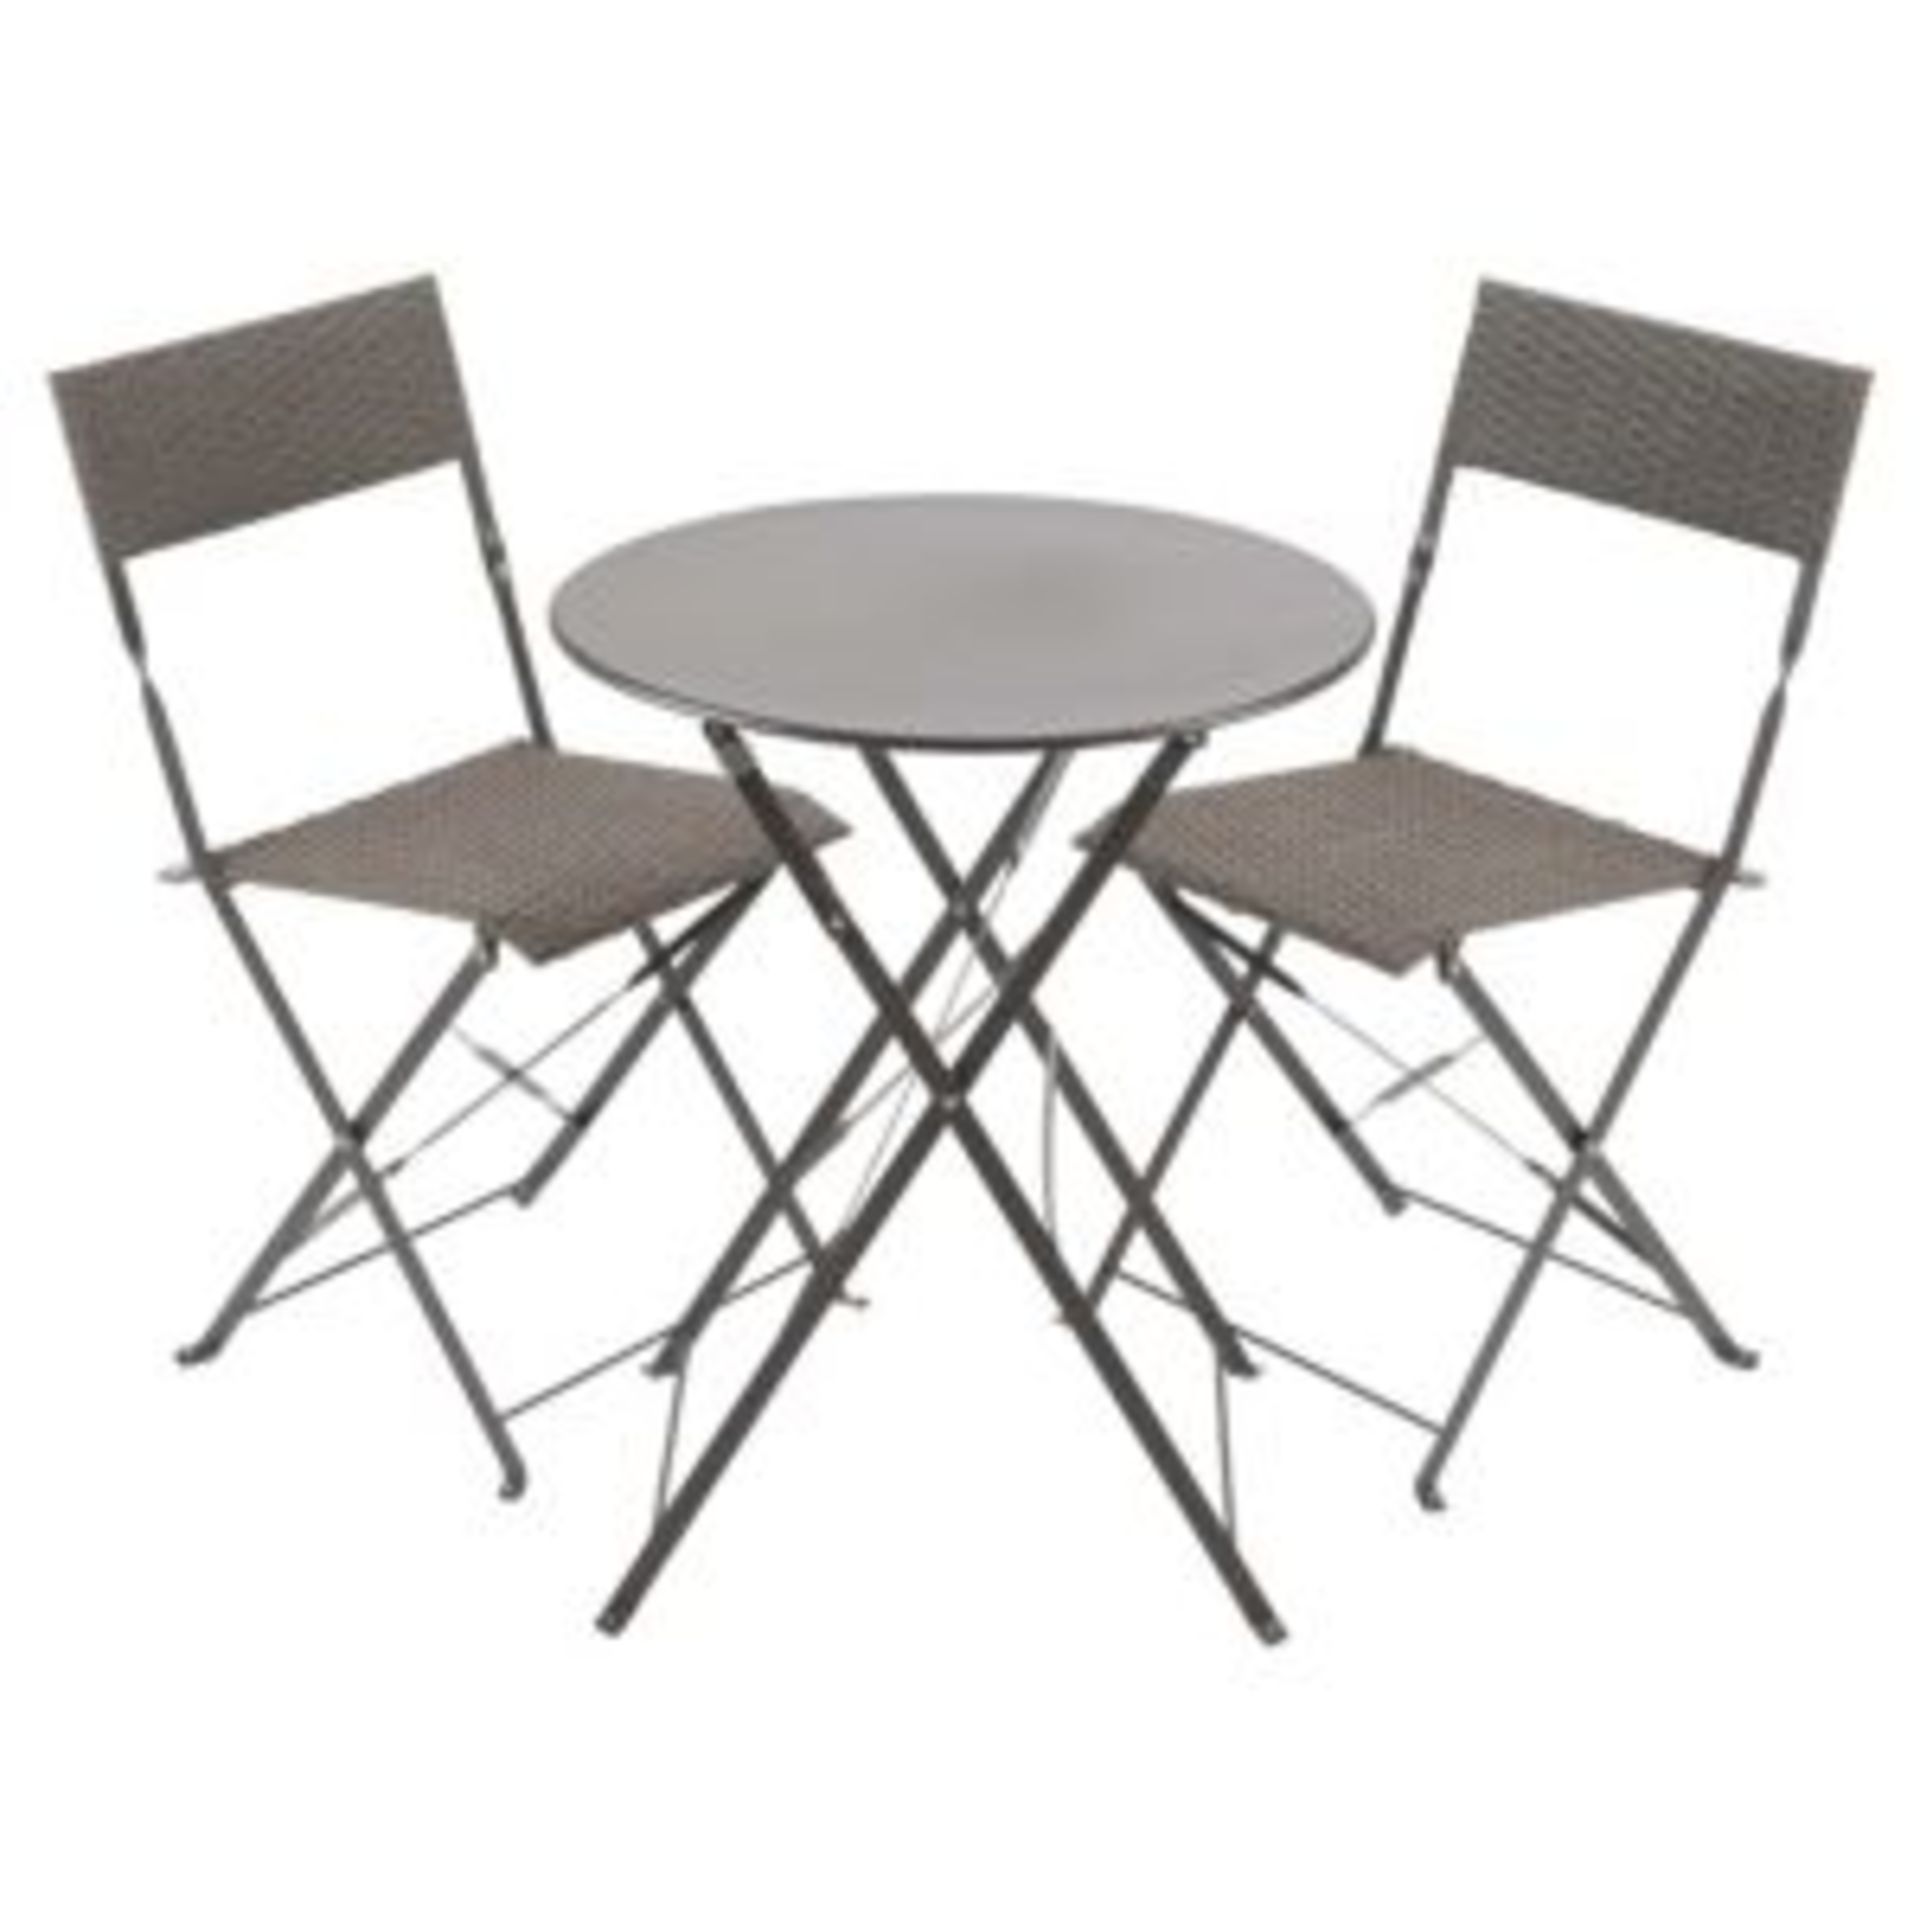 V Brand New Atlas Rattan Folding Bistro Set - Metal Table - Two Chairs - ISP £91.99 - Image 2 of 2